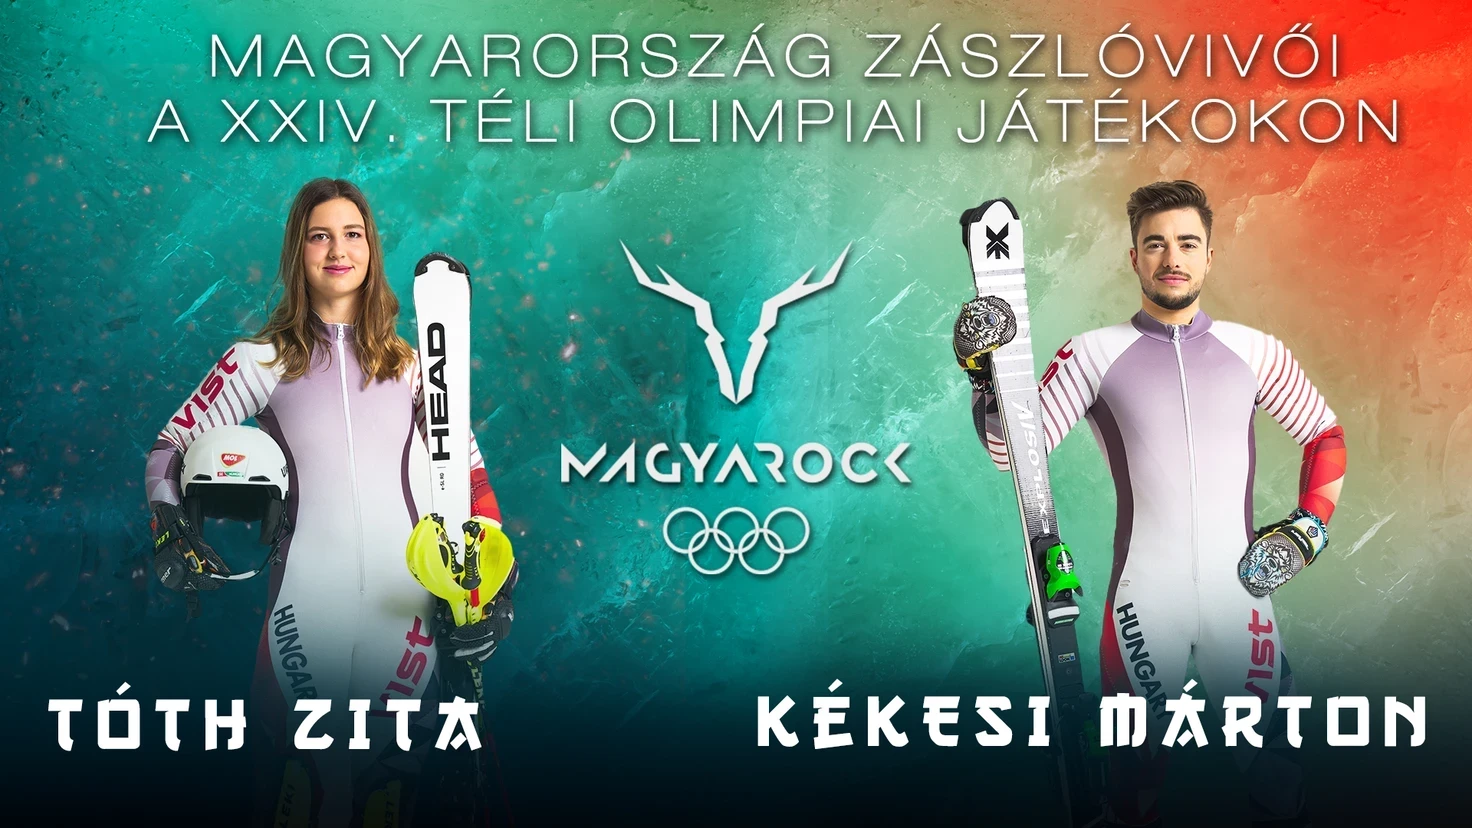 Skiers Márton Kékesi and Zita Tóth, who competed in the Winter Youth Olympic Games, have been chosen to carry Hungary's flag at the Opening Ceremony of Beijing 2022 ©MOB